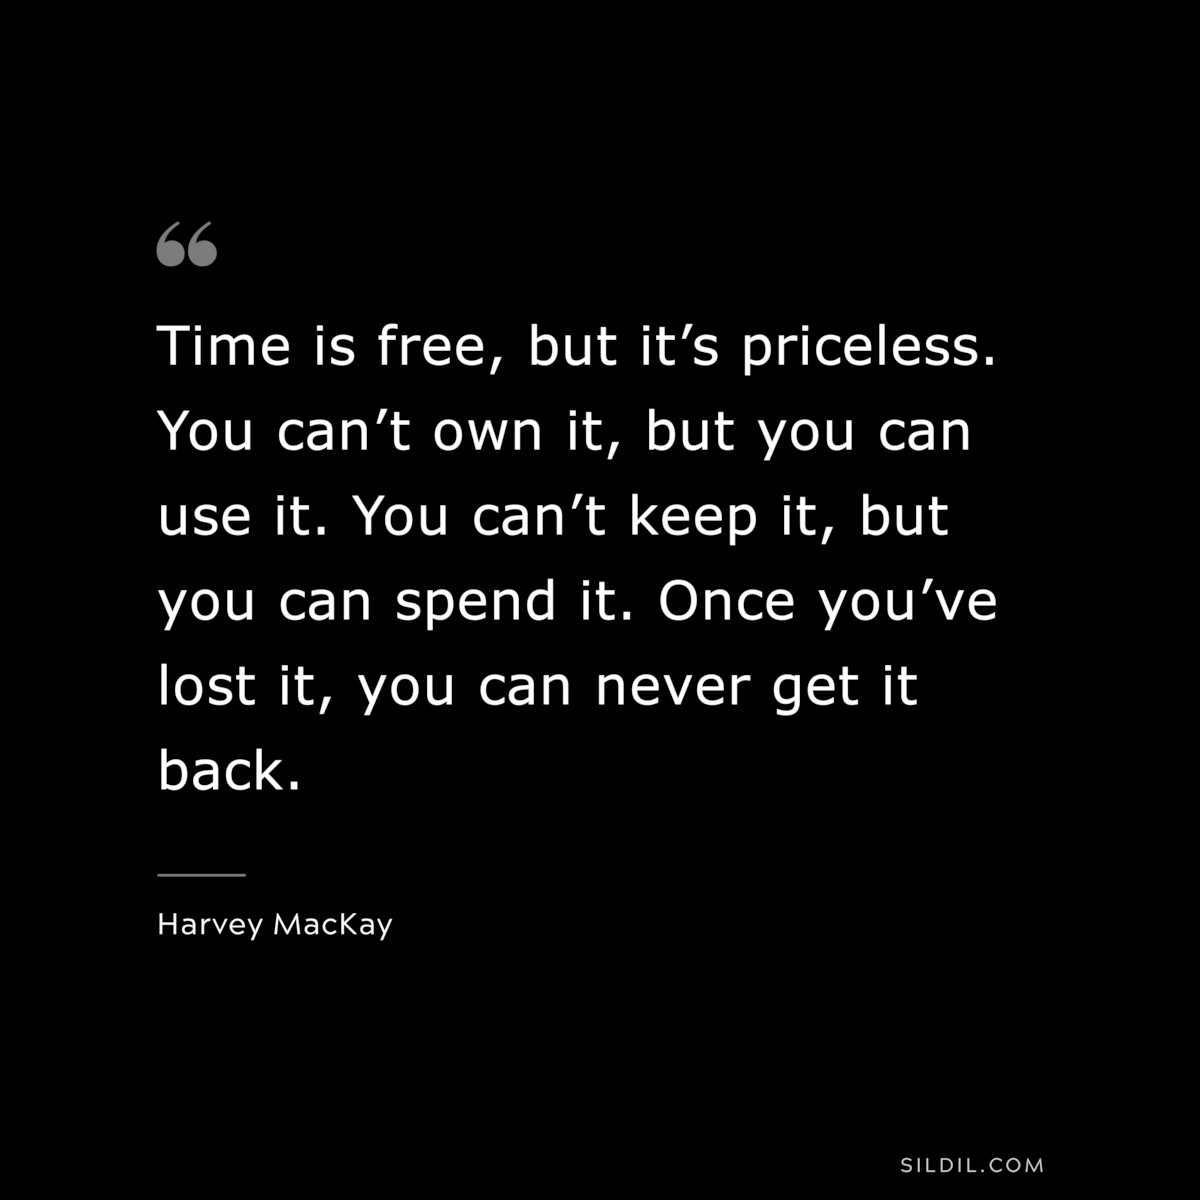 Time is free, but it’s priceless. You can’t own it, but you can use it. You can’t keep it, but you can spend it. Once you’ve lost it, you can never get it back. ― Harvey MacKay